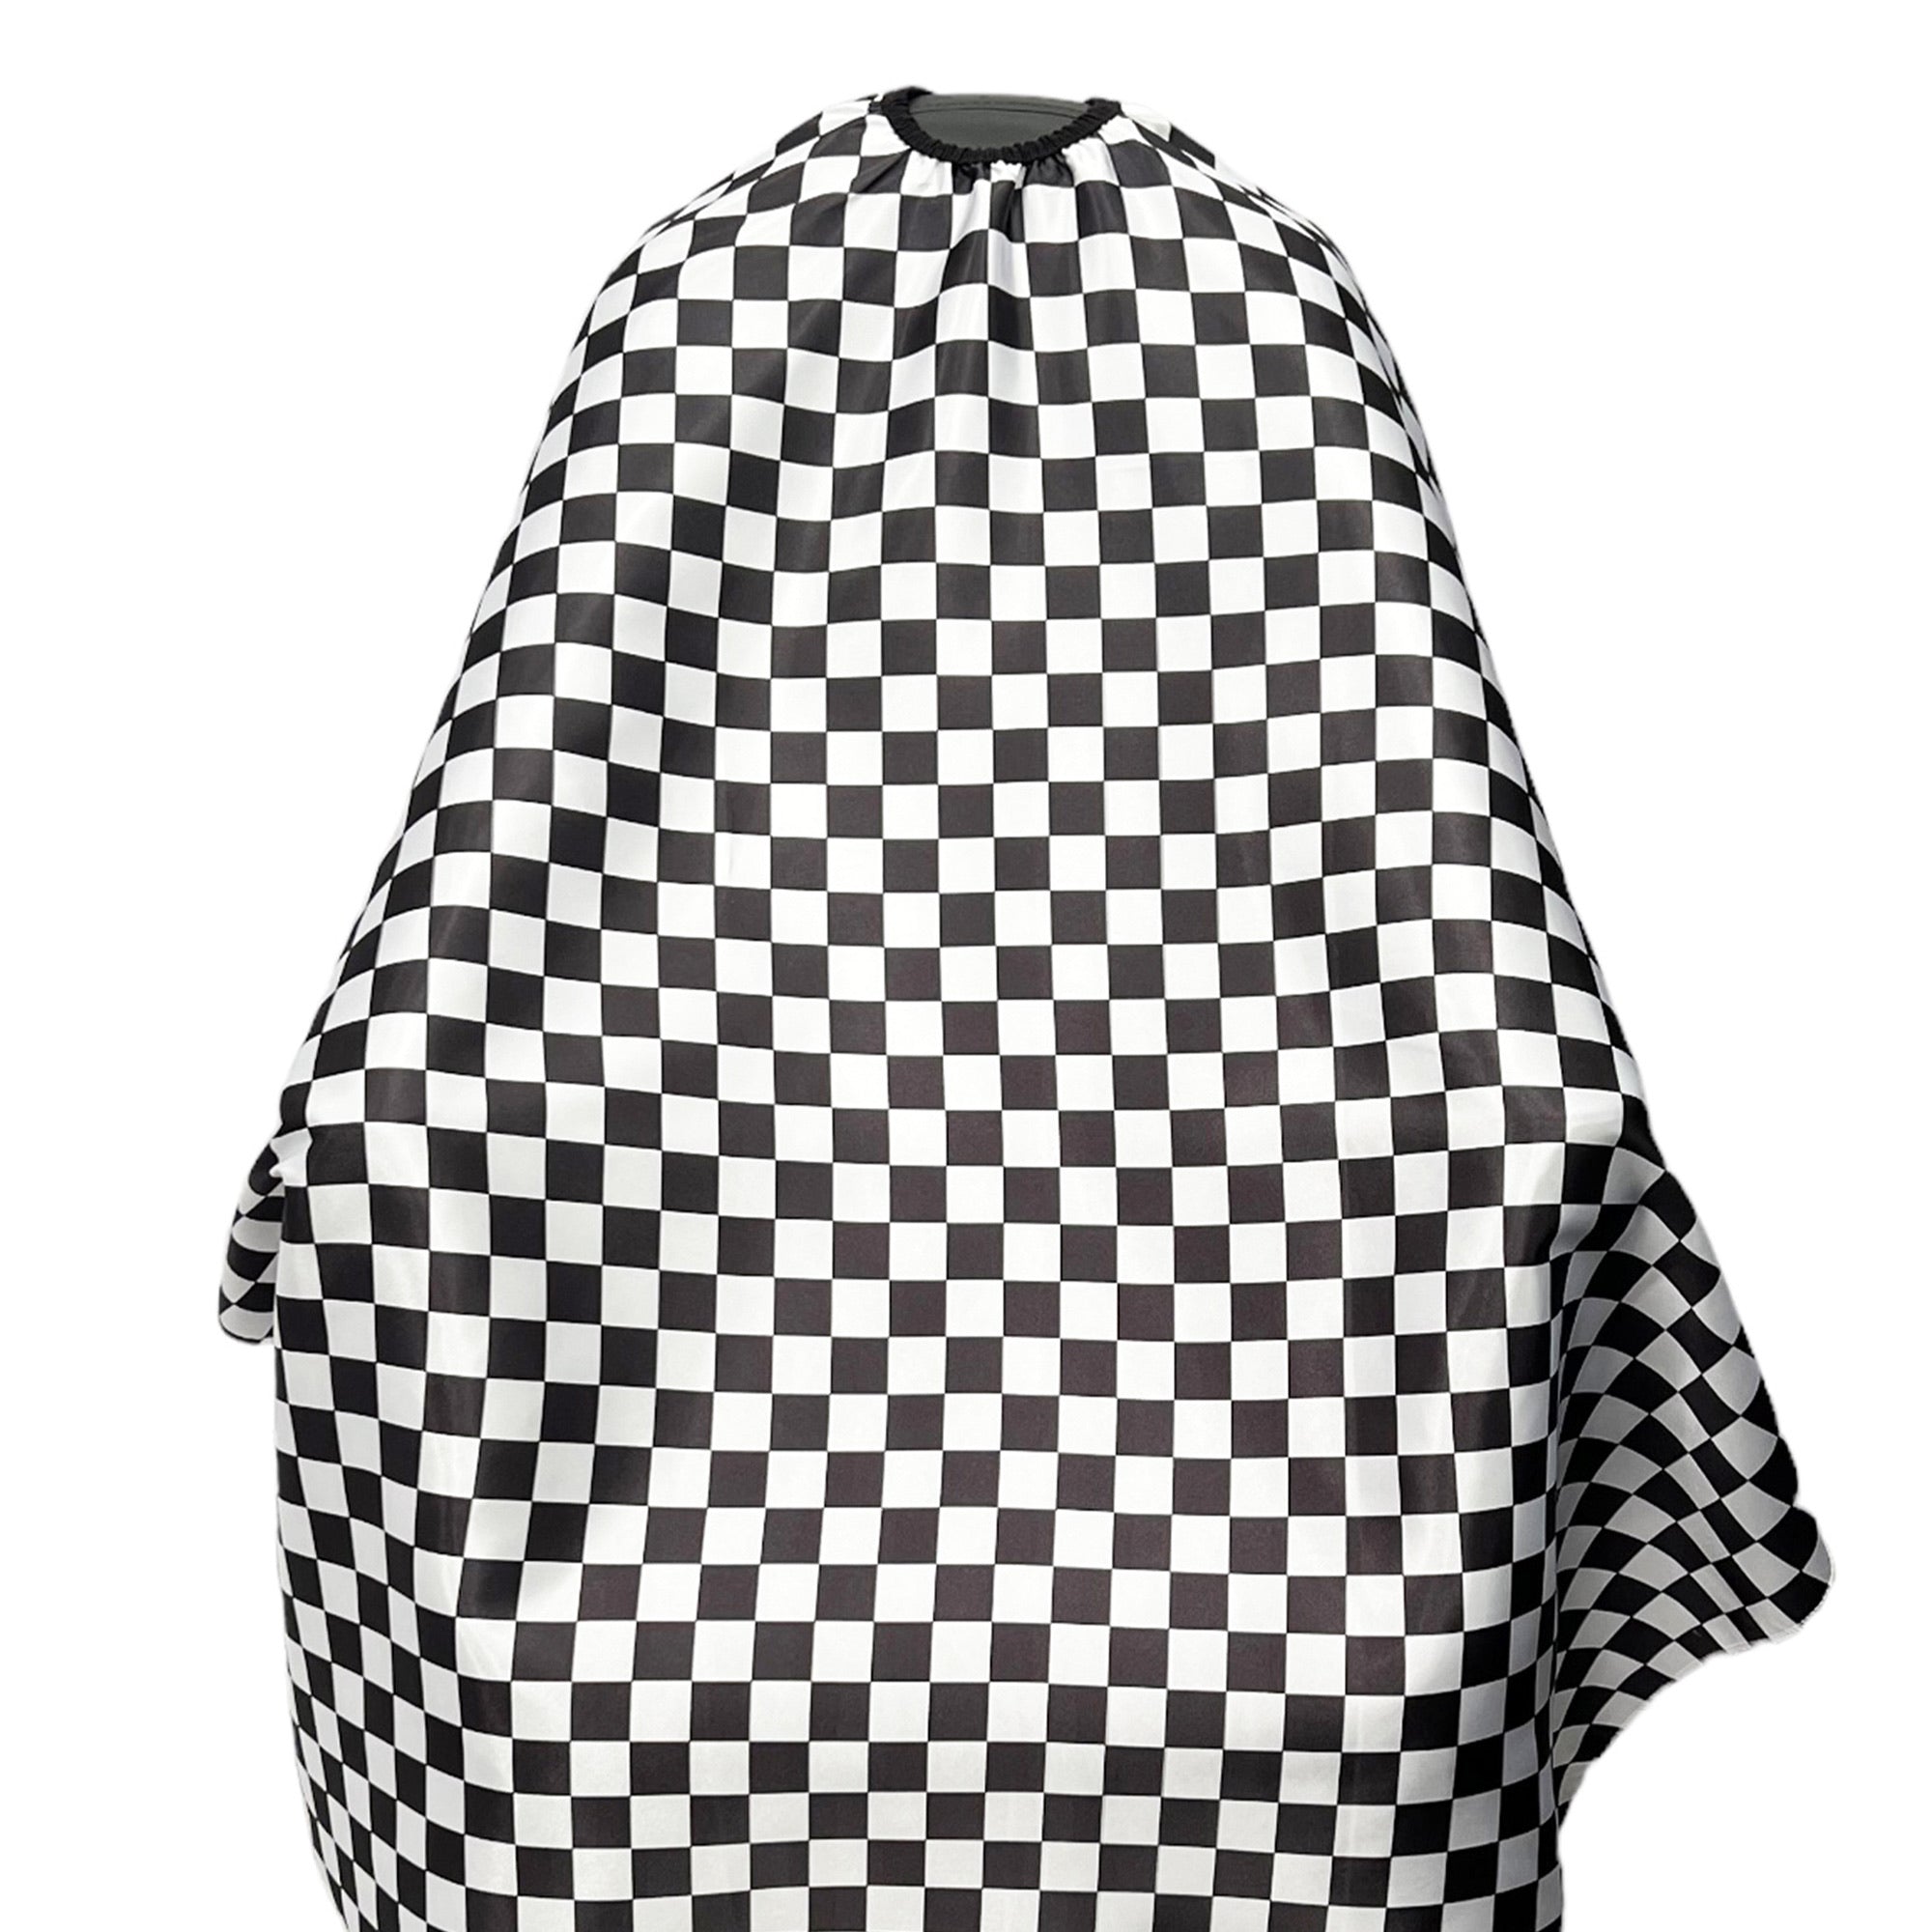 Gabri - Barber Hairdressing Hair Cutting Capes & Gowns Chequered (Black & White)